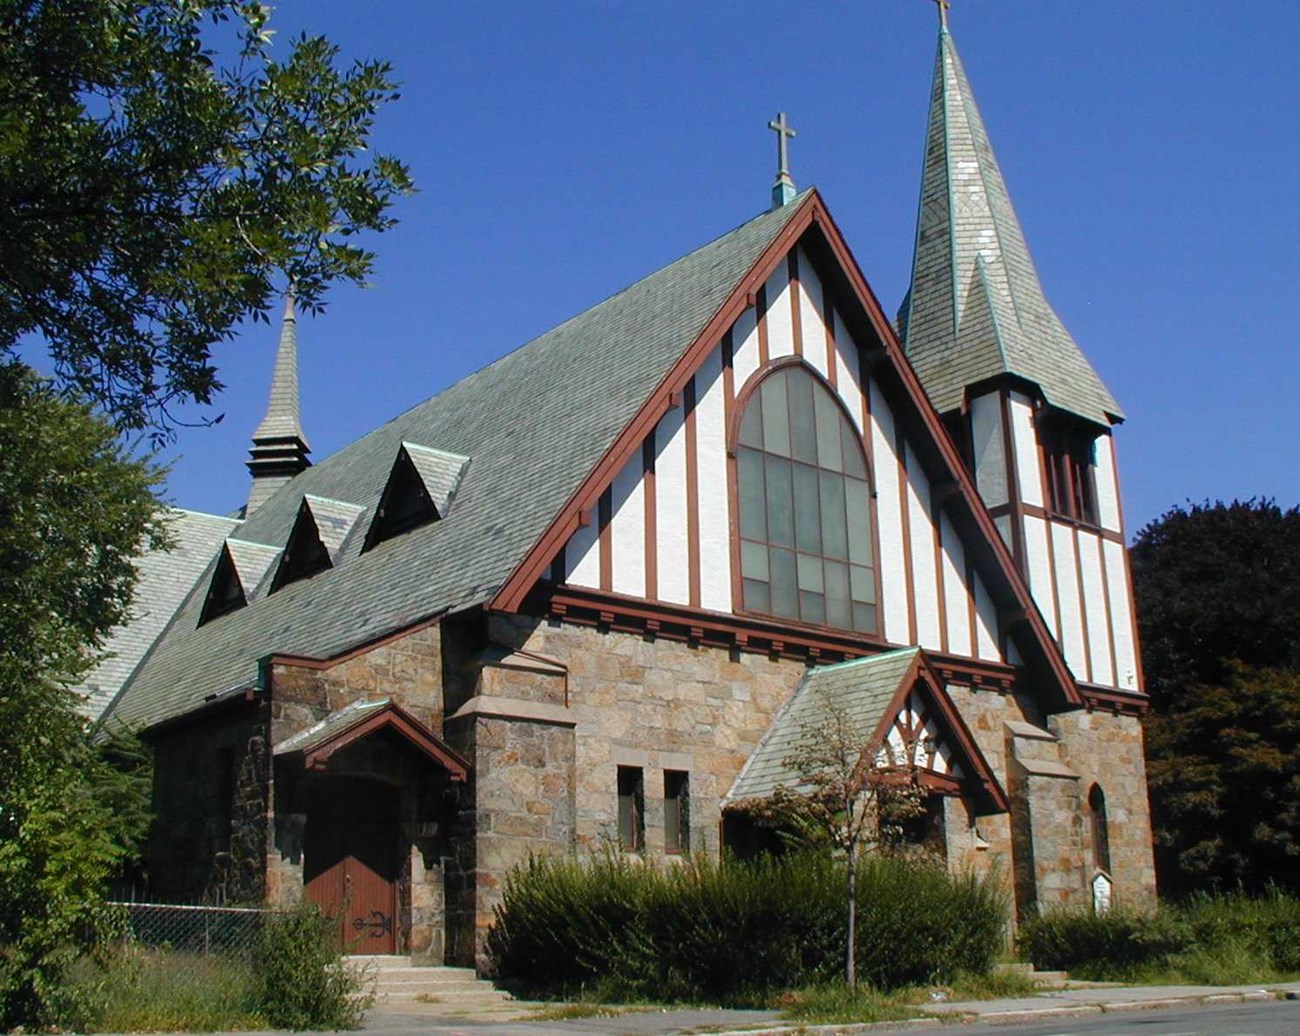 A photo of a church with stone walls, a white wooden gable and steeple with maroon trim, a multi paneled glass window, a maroon door, shrubbery in front and trees in the background.